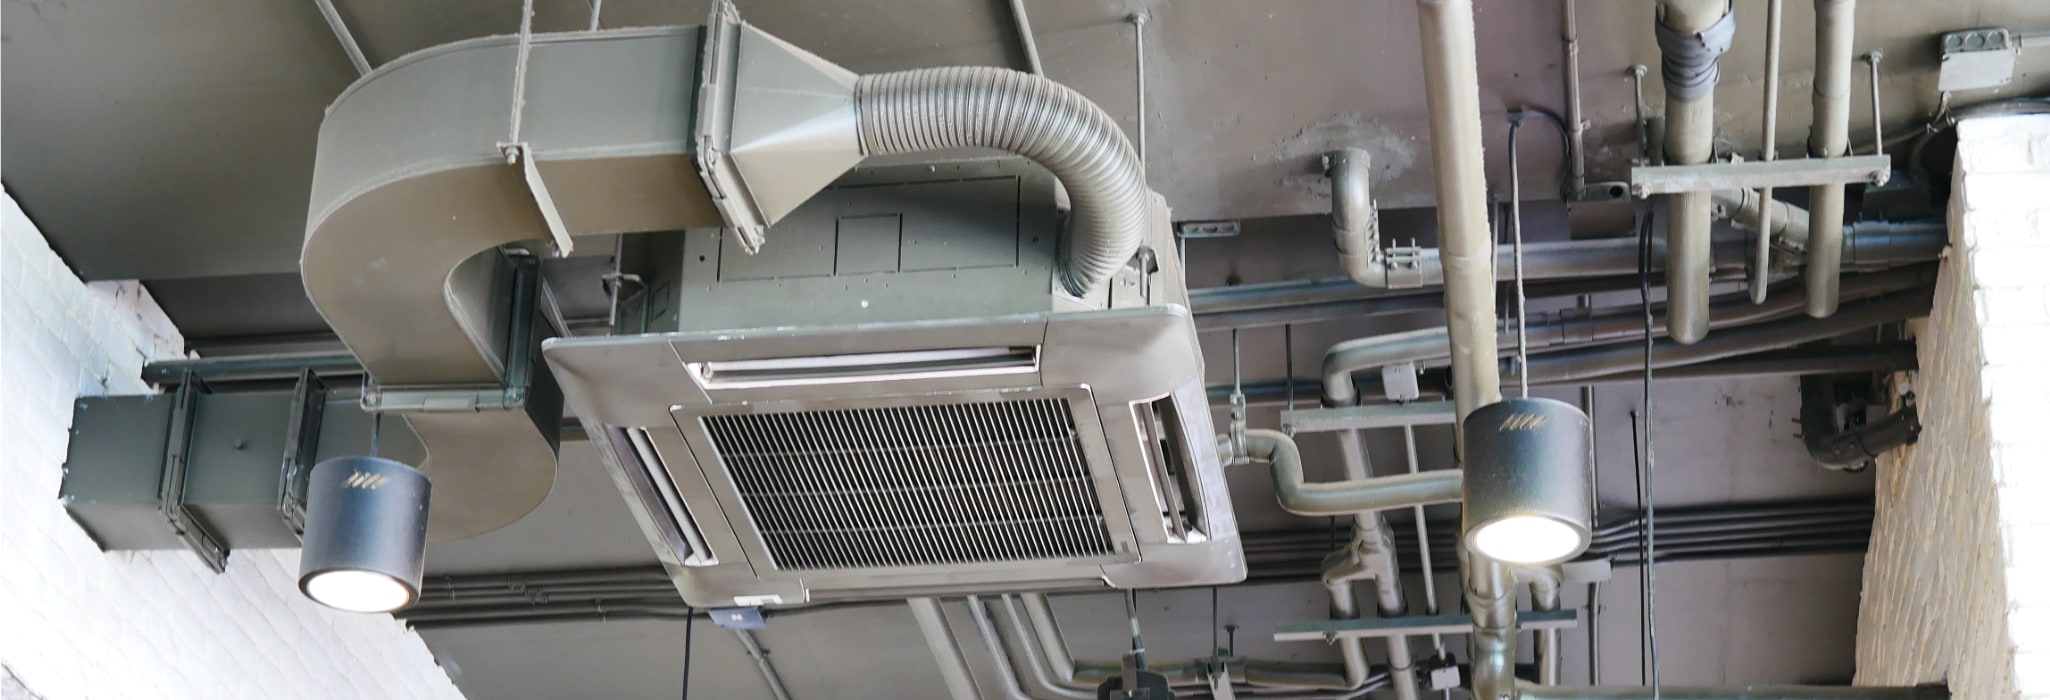 Commercial Air Conditioning Service.